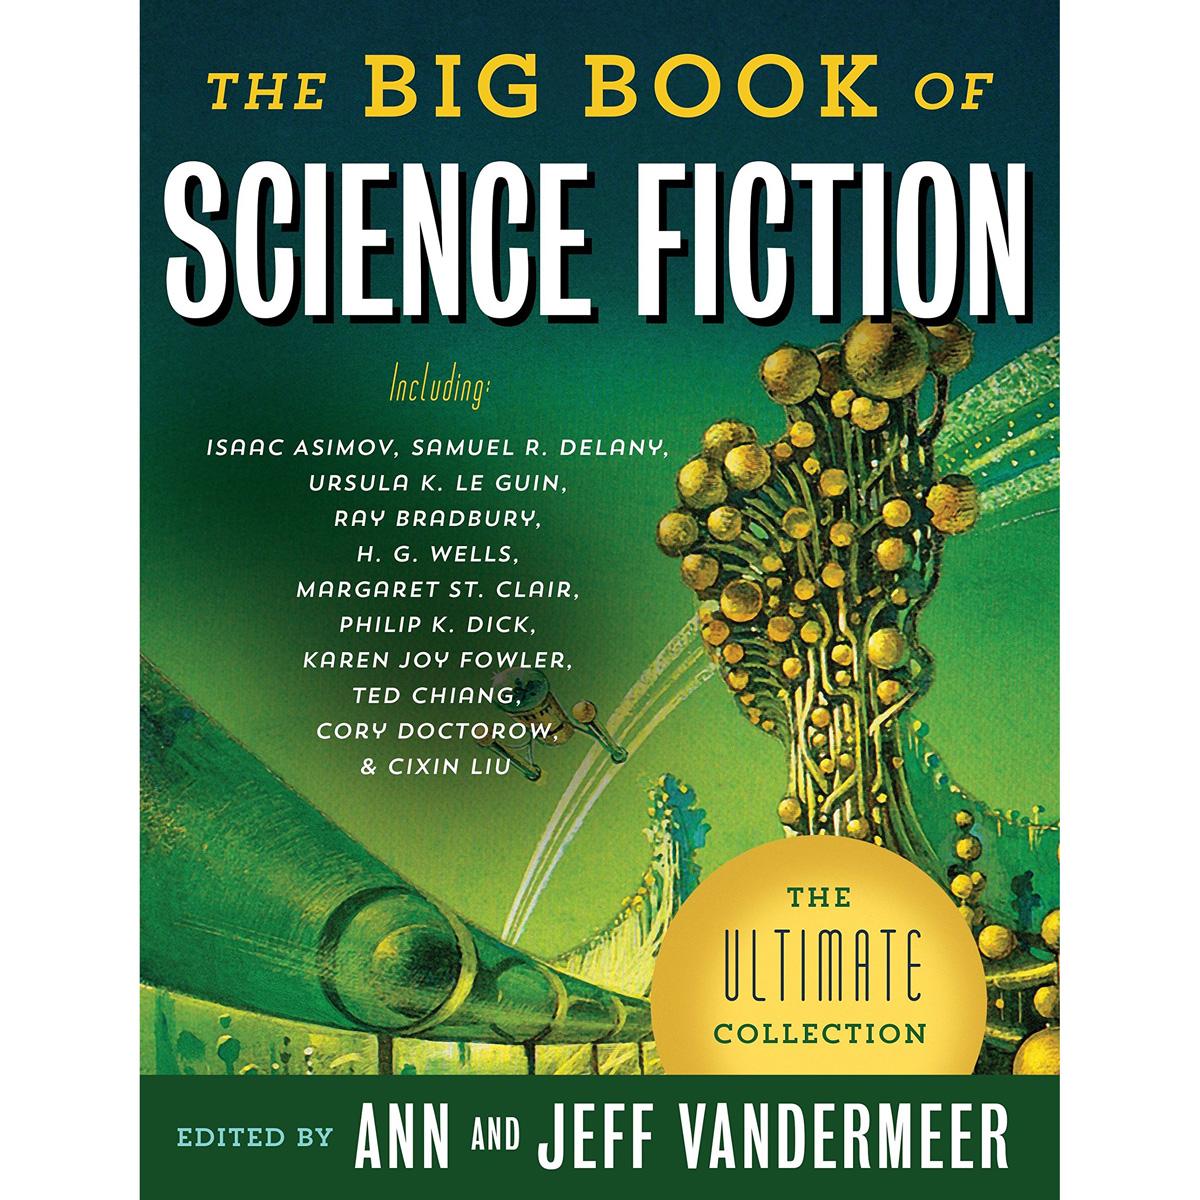 The Big Book of Science Fiction eBook for $2.99